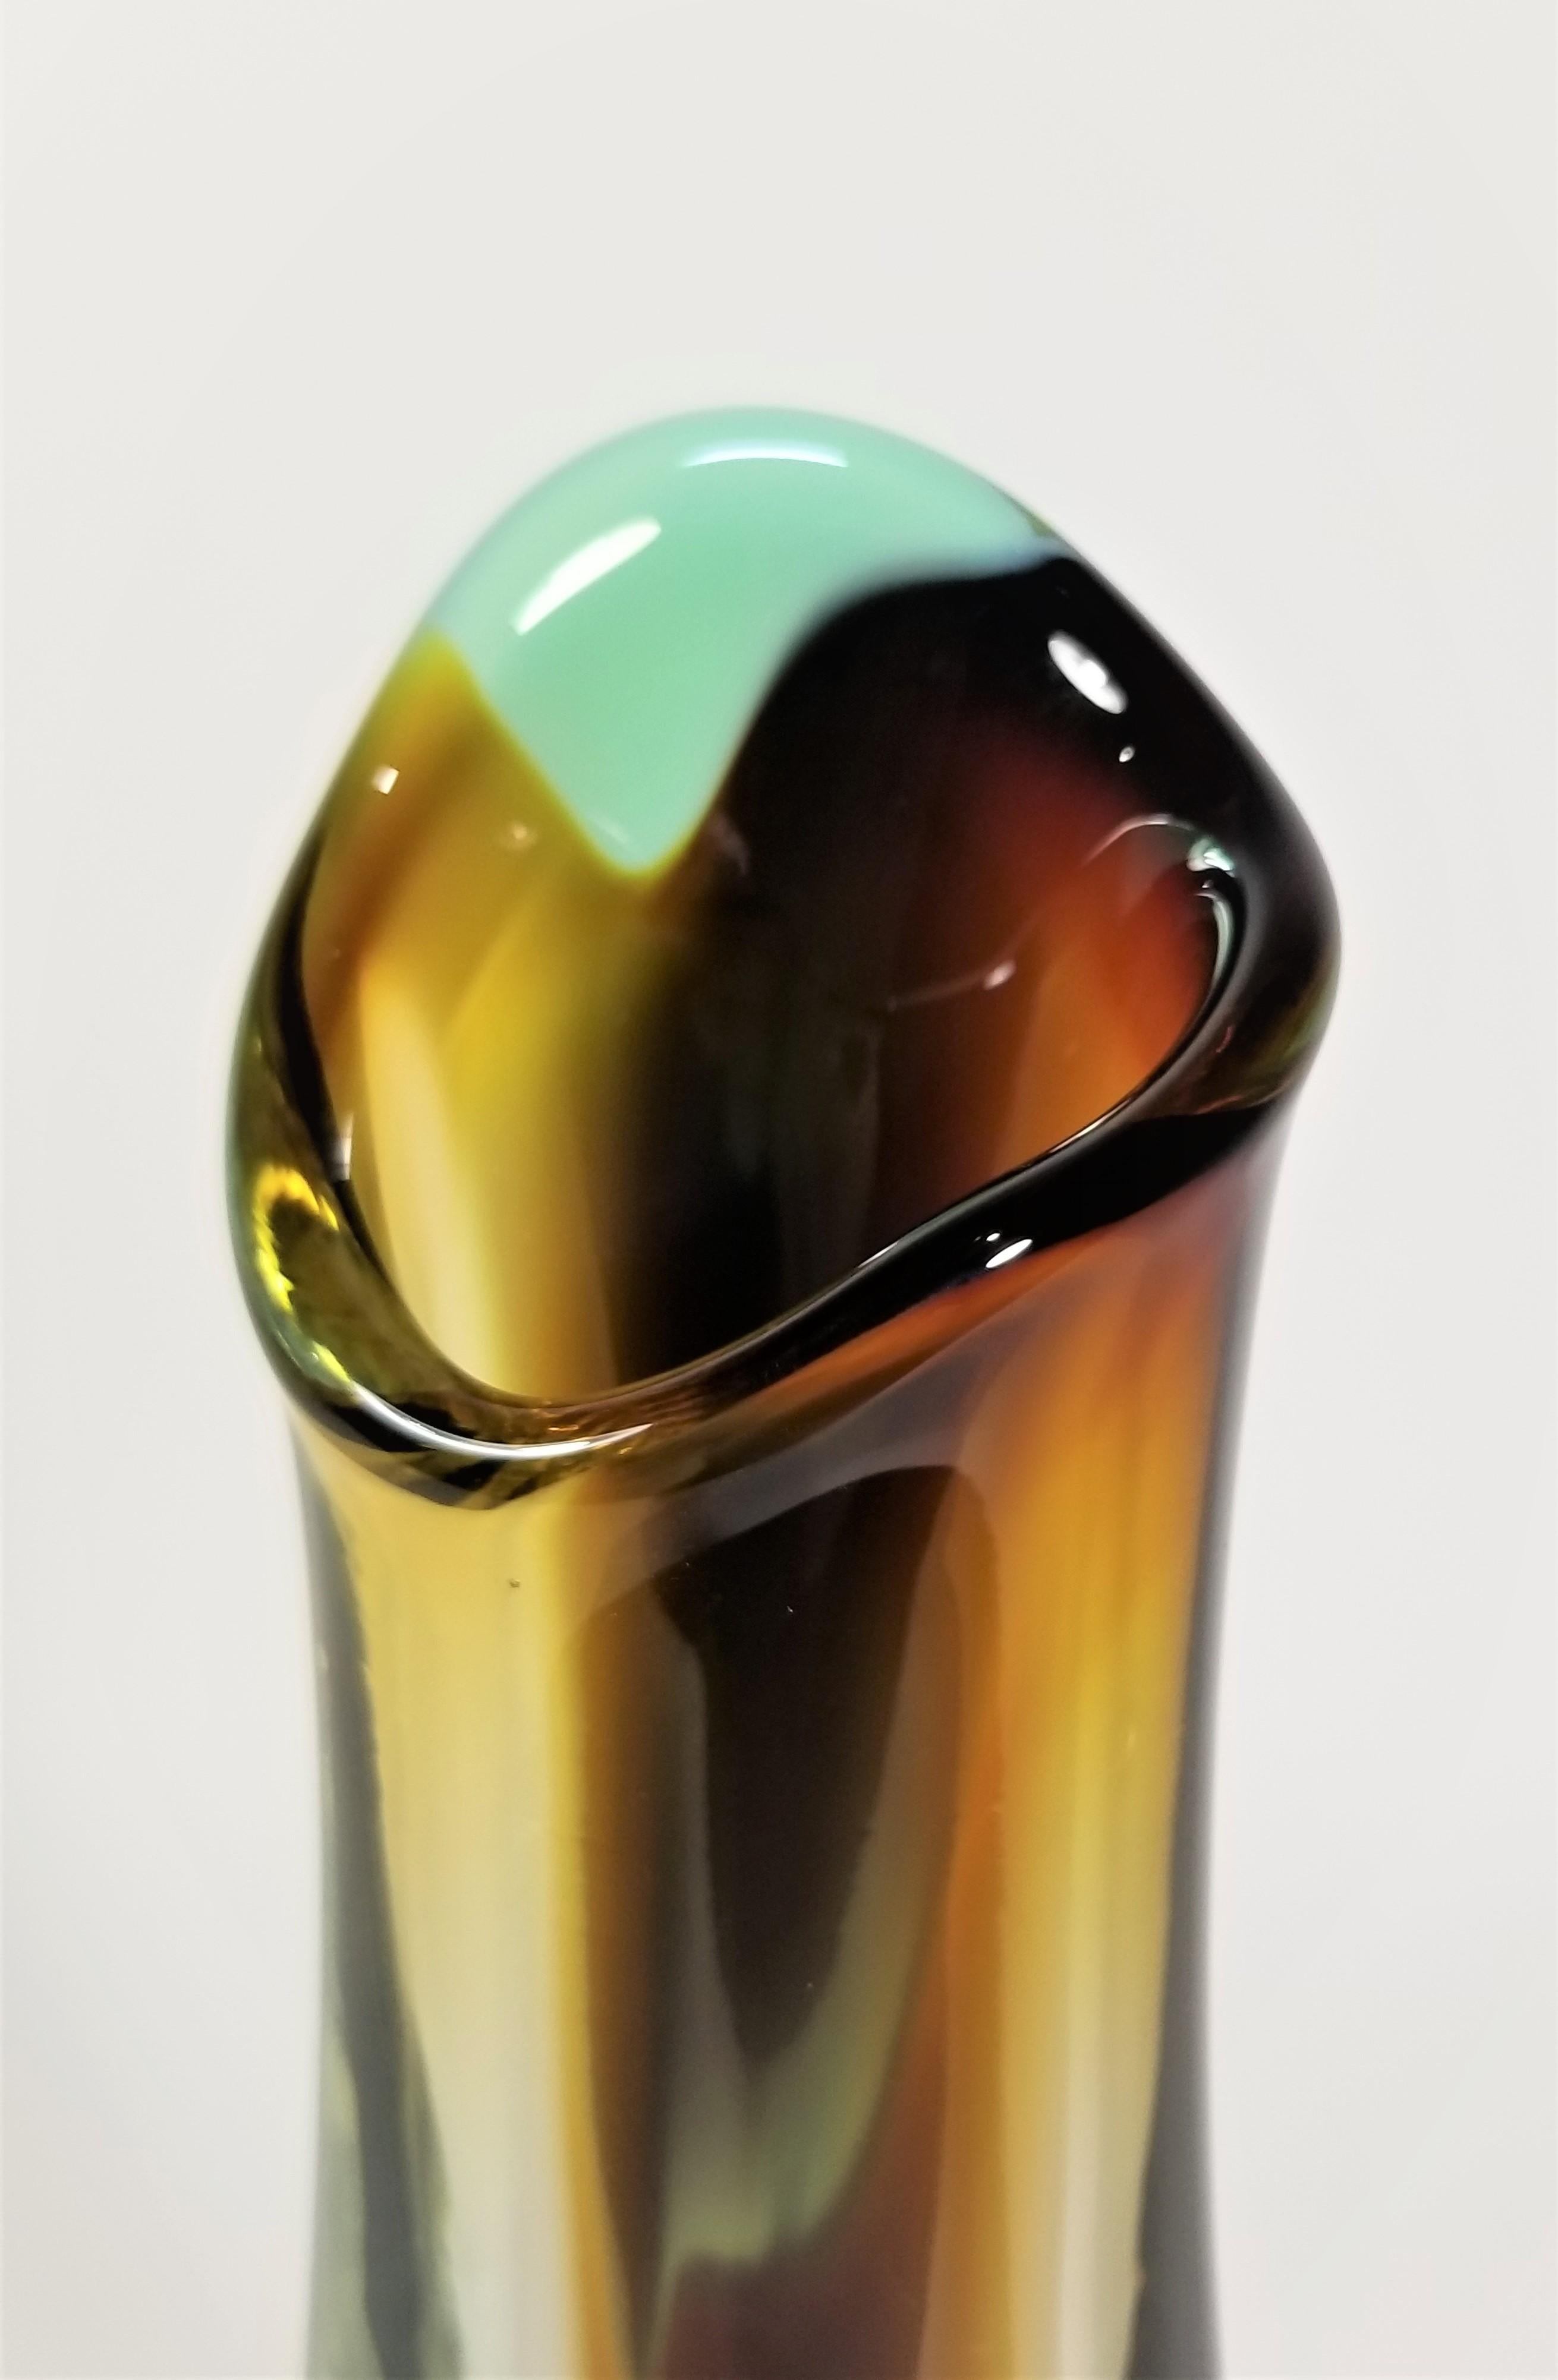 1980s Art Glass Vase or Decorative Object Artist Signed and Dated In Excellent Condition For Sale In New York, NY